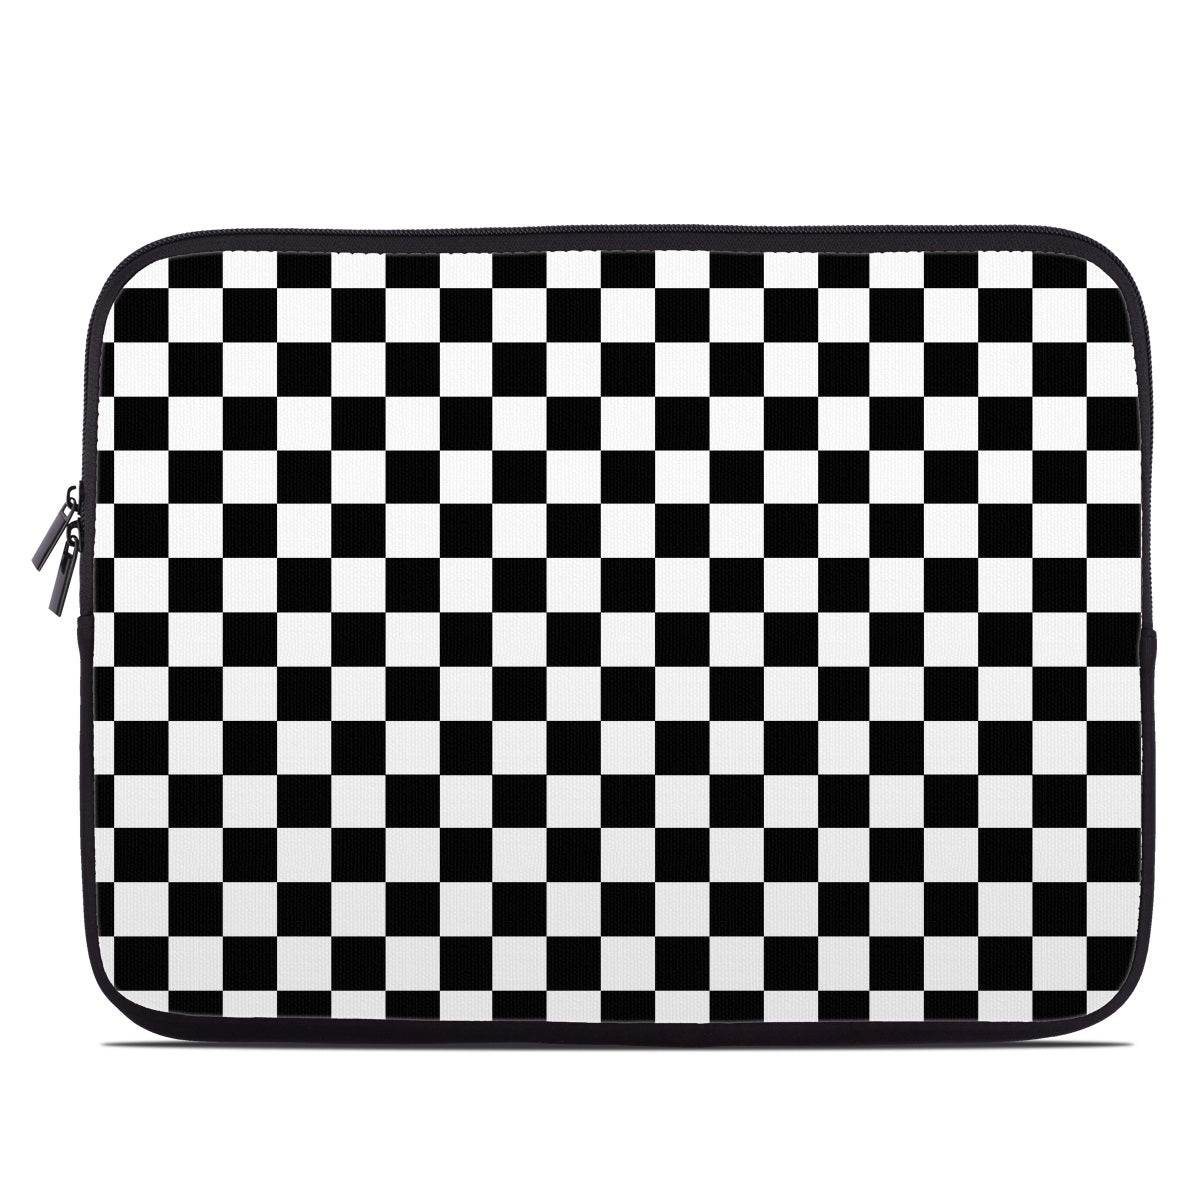 Checkers - Laptop Sleeve